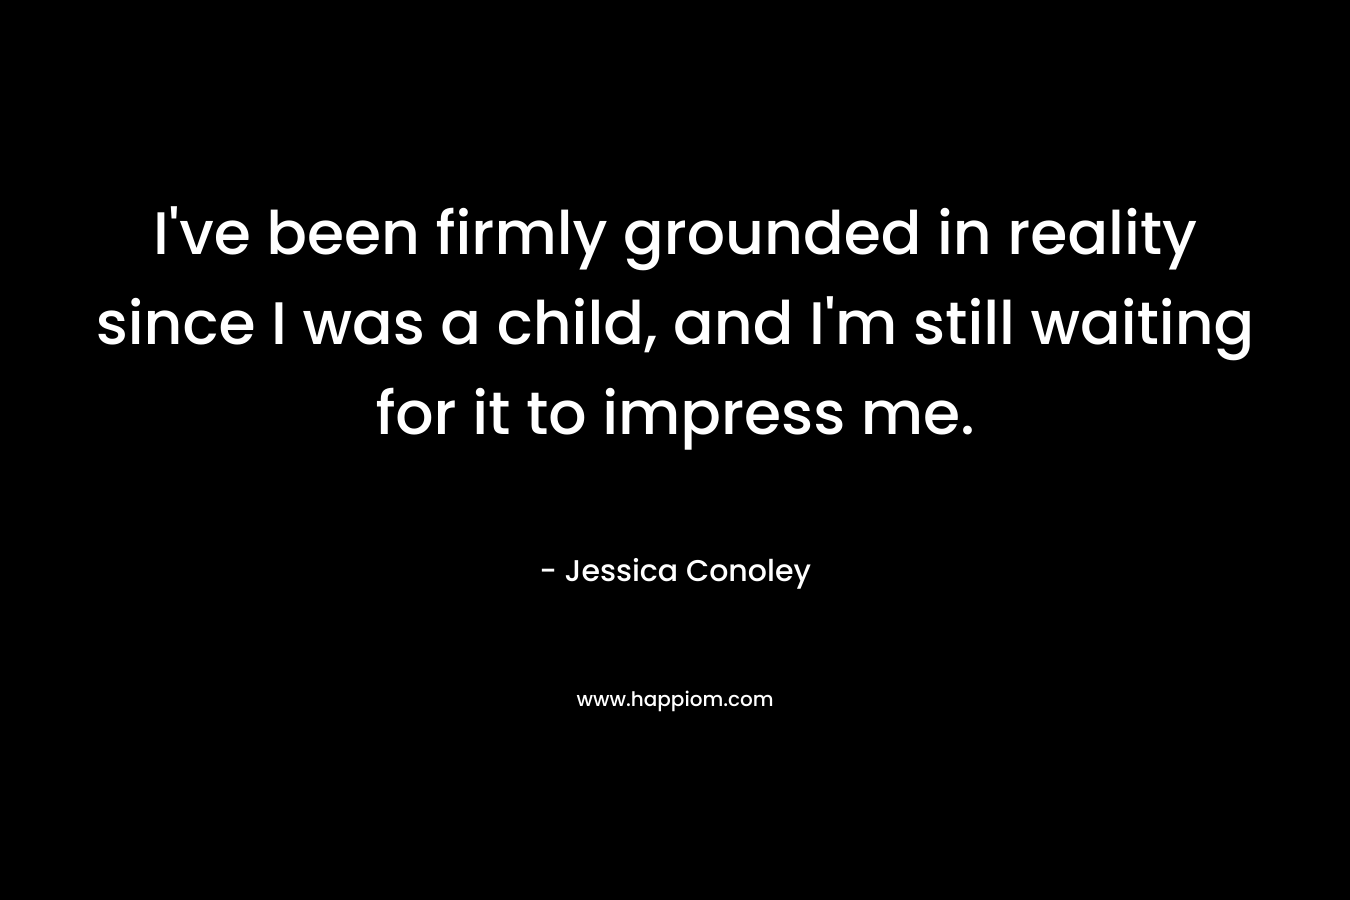 I've been firmly grounded in reality since I was a child, and I'm still waiting for it to impress me.